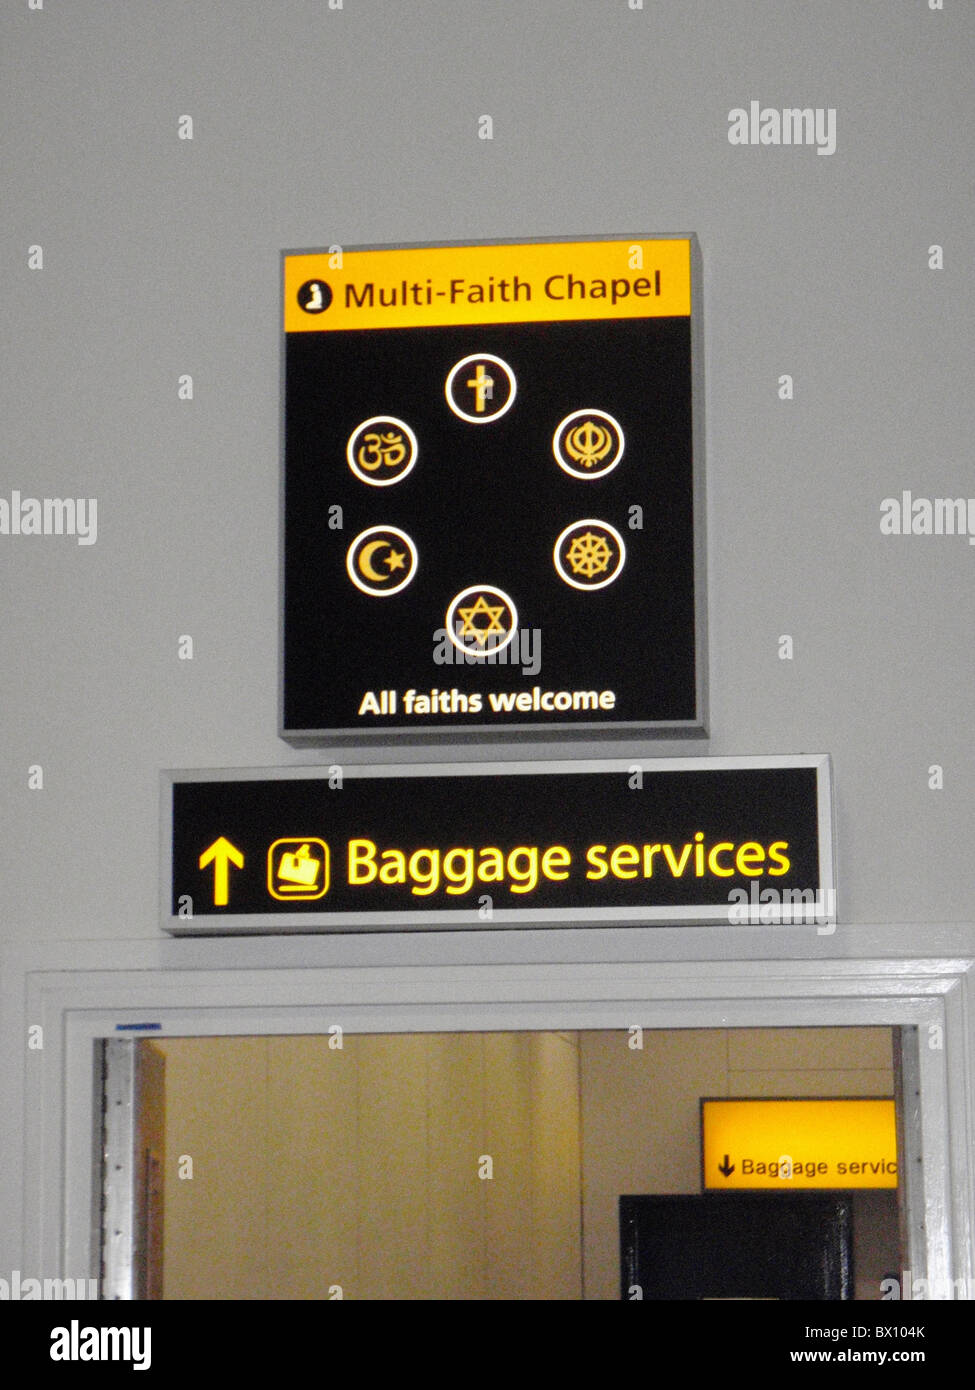 Multi-faith chapel sign in an Airport Stock Photo